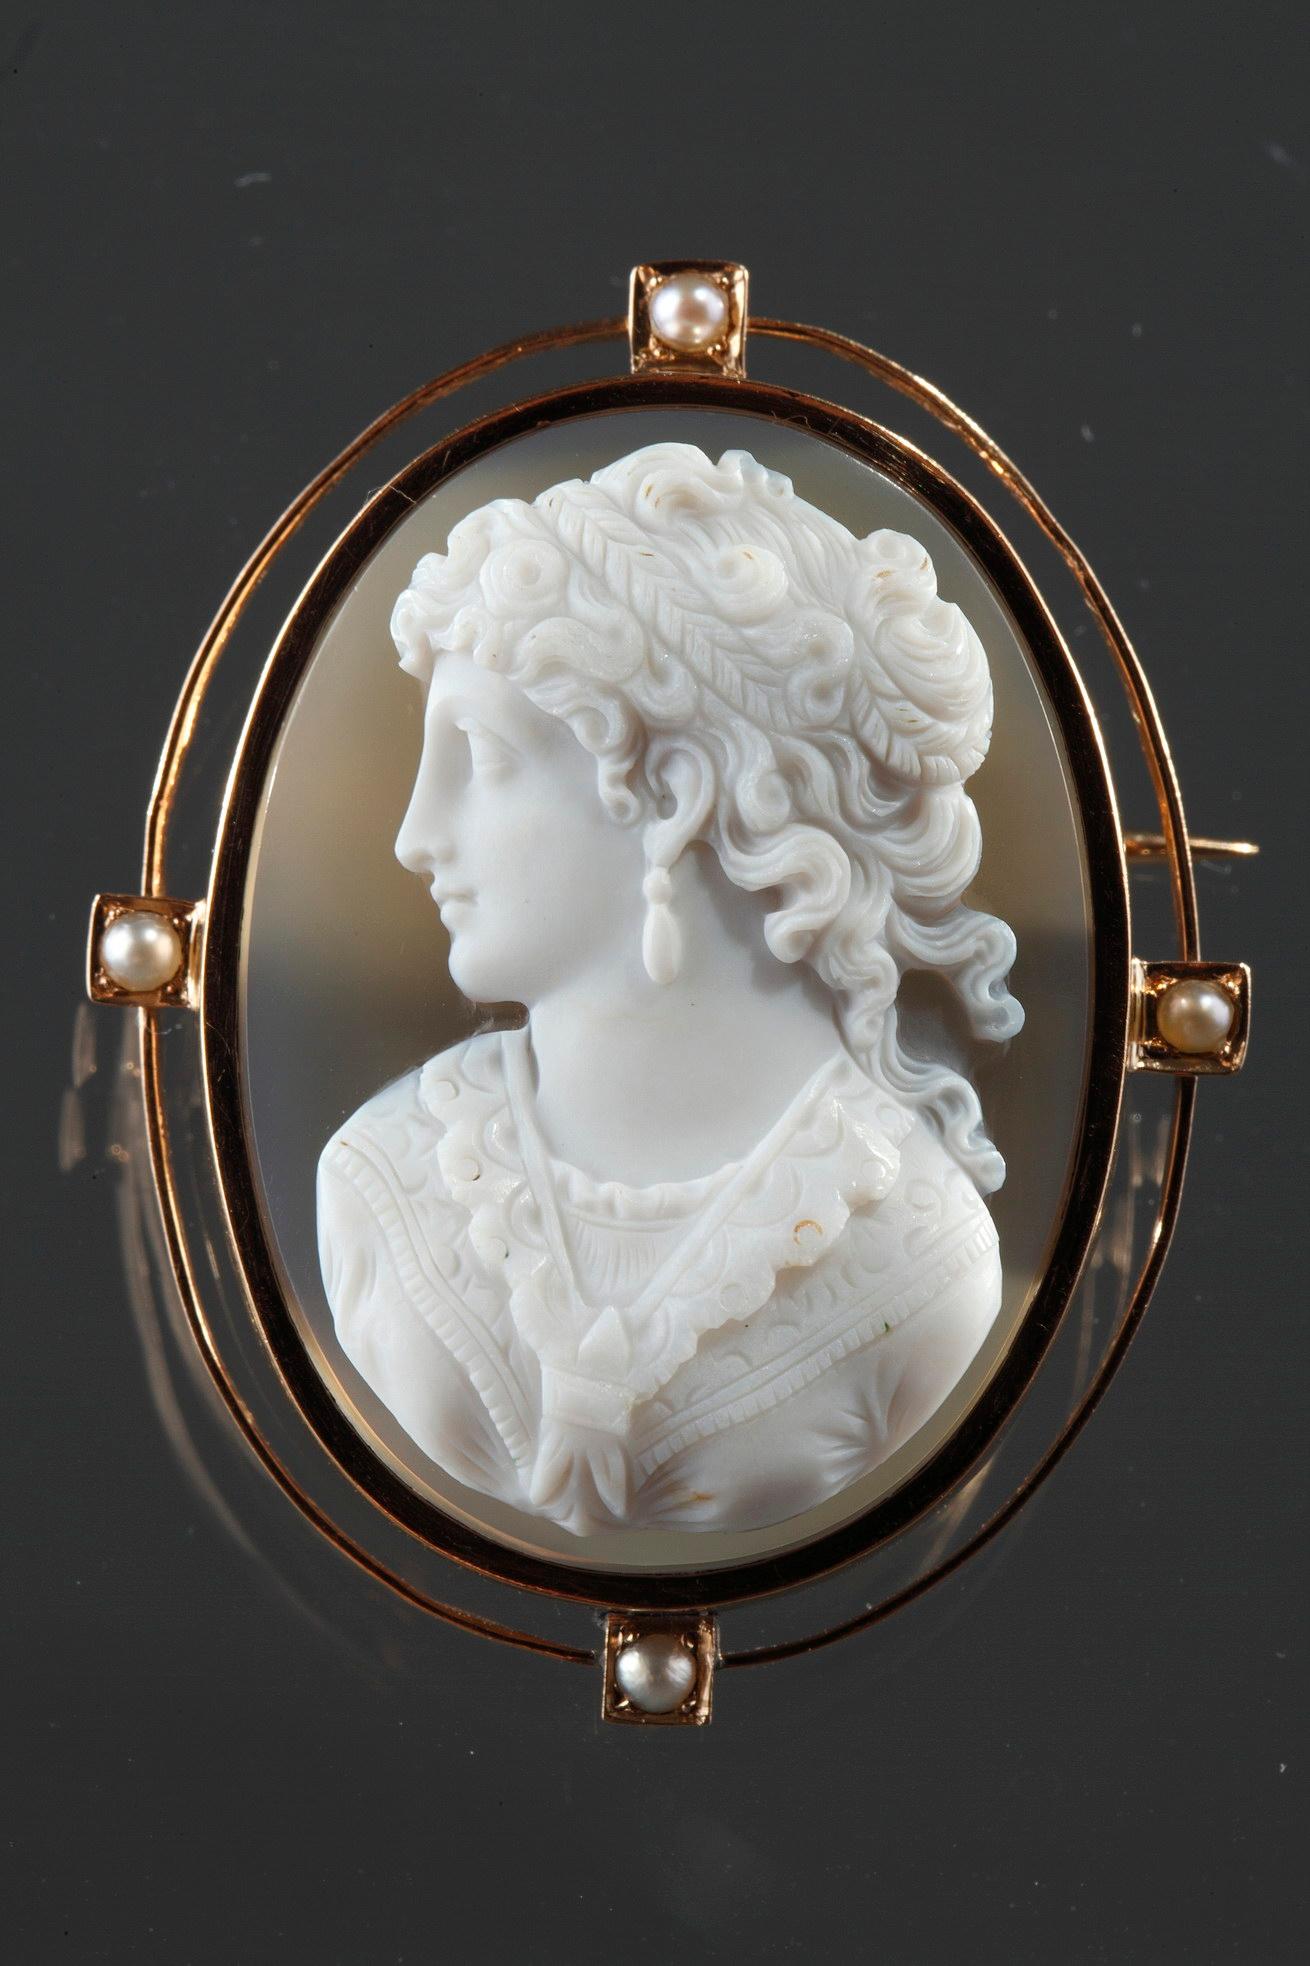 Cameo on blue-gray agate featuring a young woman looking toward the left. The artist intricately sculpted the white vein of the agate to bring the delicate profile to life. The young woman is wearing a dress with lace scarf.

His hair is knotted and